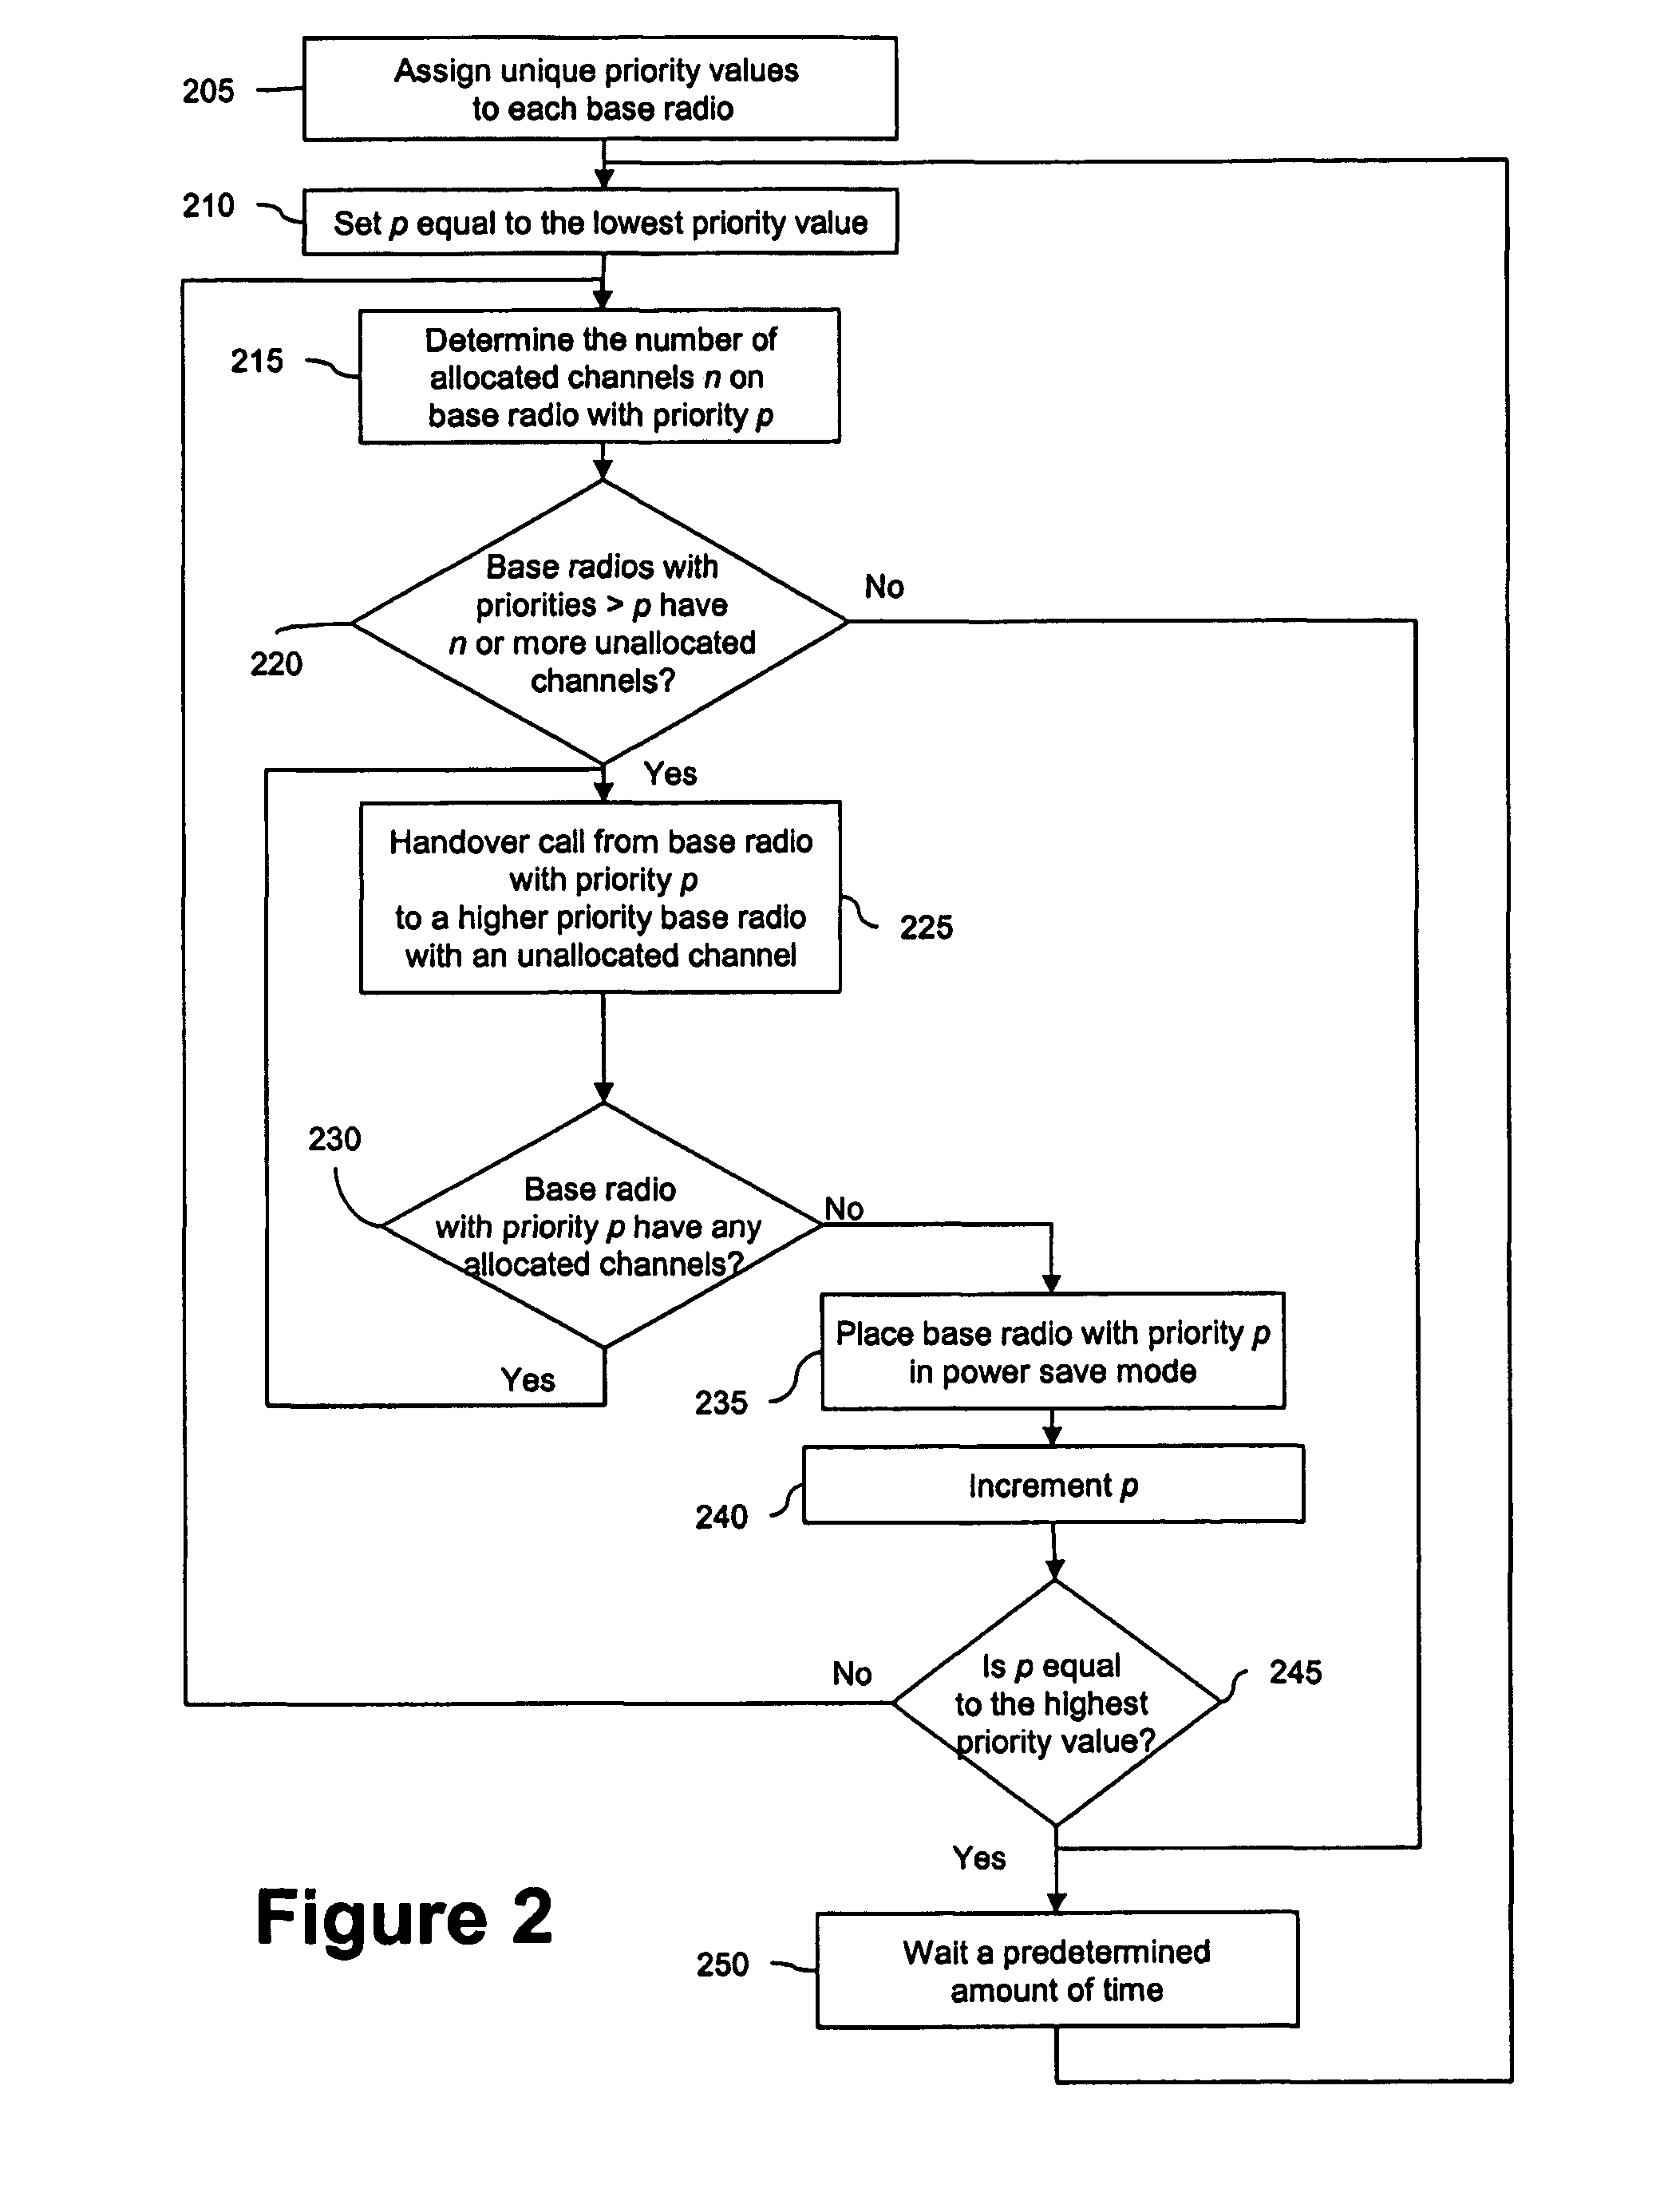 Systems and methods for handovers between base radios